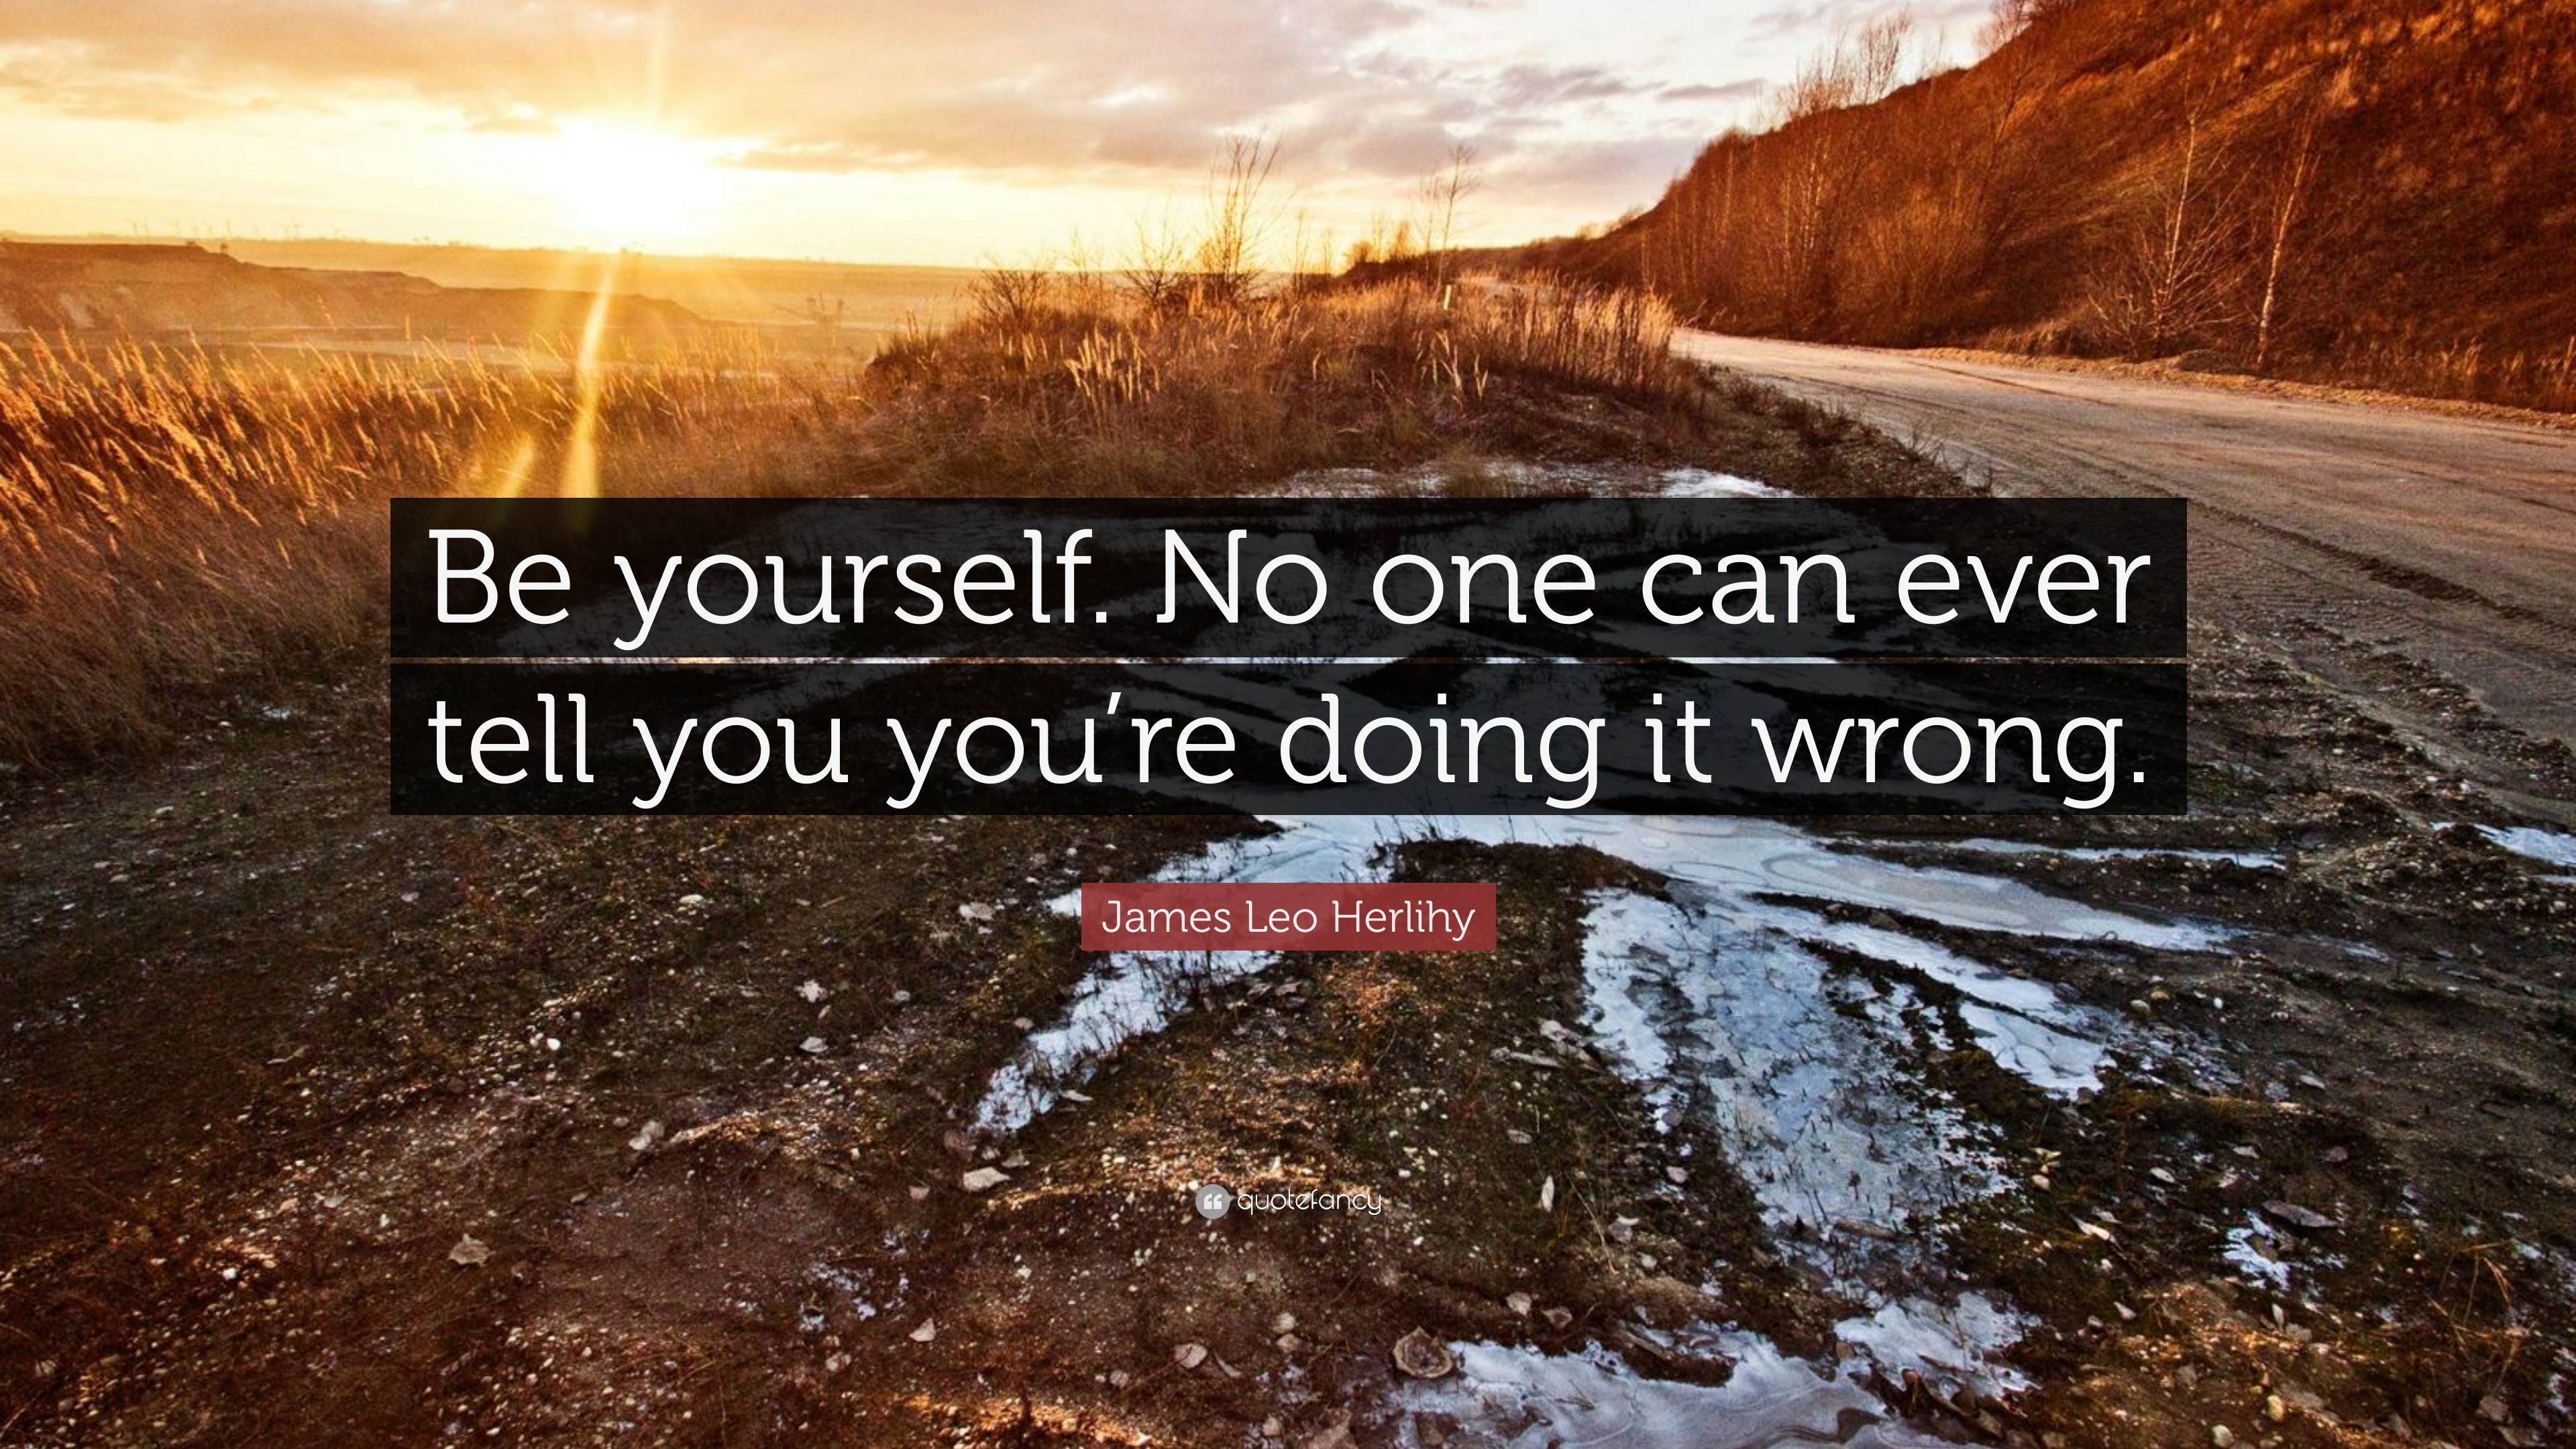 James Leo Herlihy Quote: “Be yourself. No one can ever tell you you’re ...